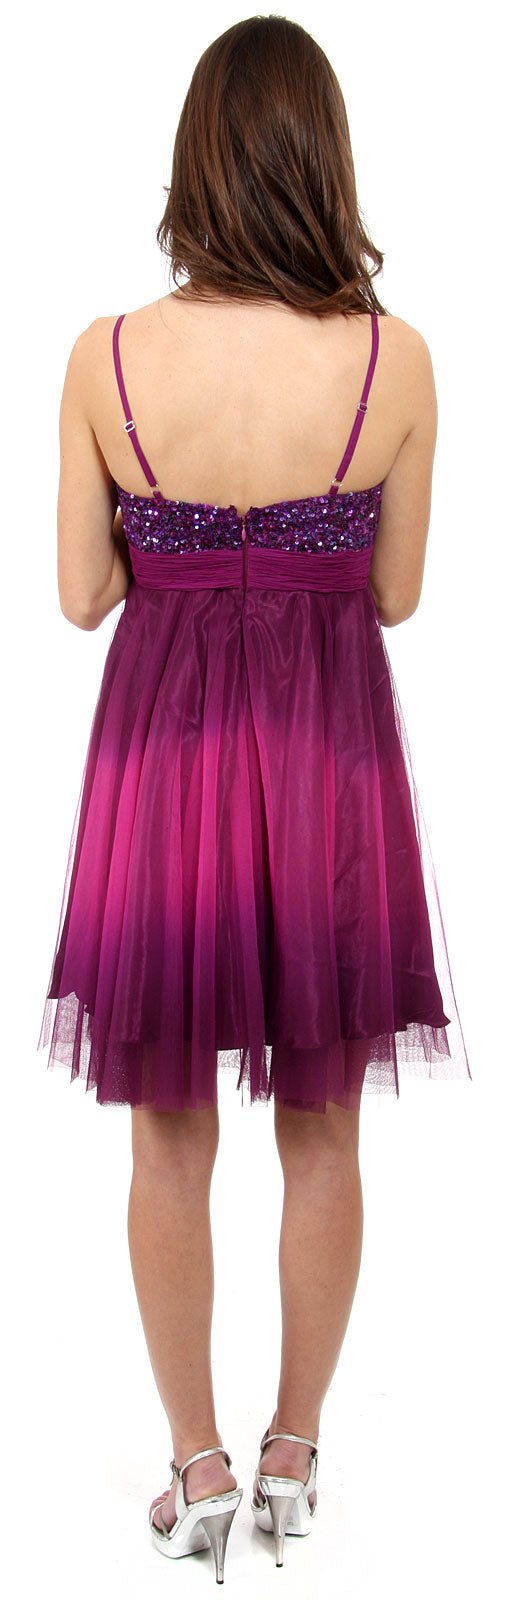 Image of Spaghetti Straps 2 Tone Beaded Bust Short Formal Party Dress back in Purple